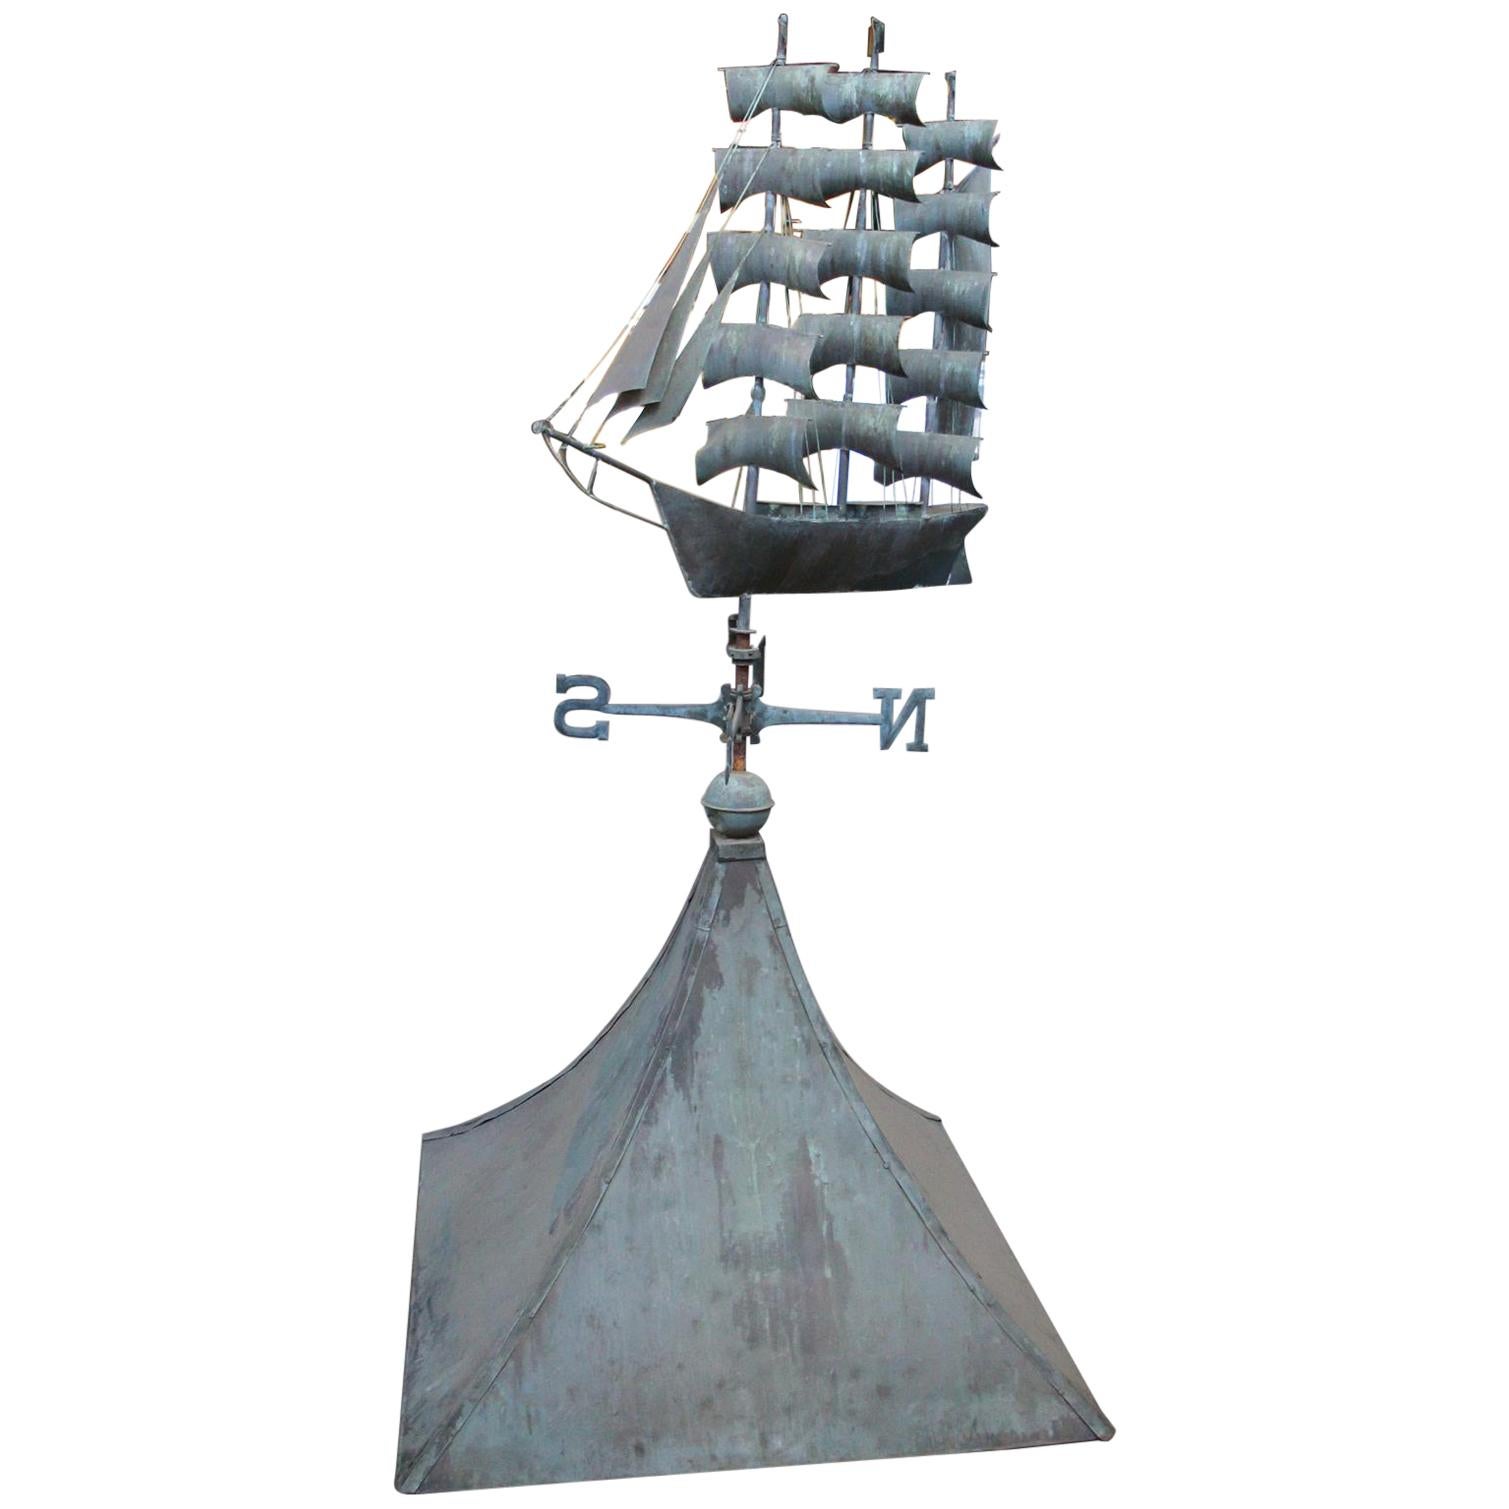 1950s Copper Cupola with Sailing Ship Weather Vane